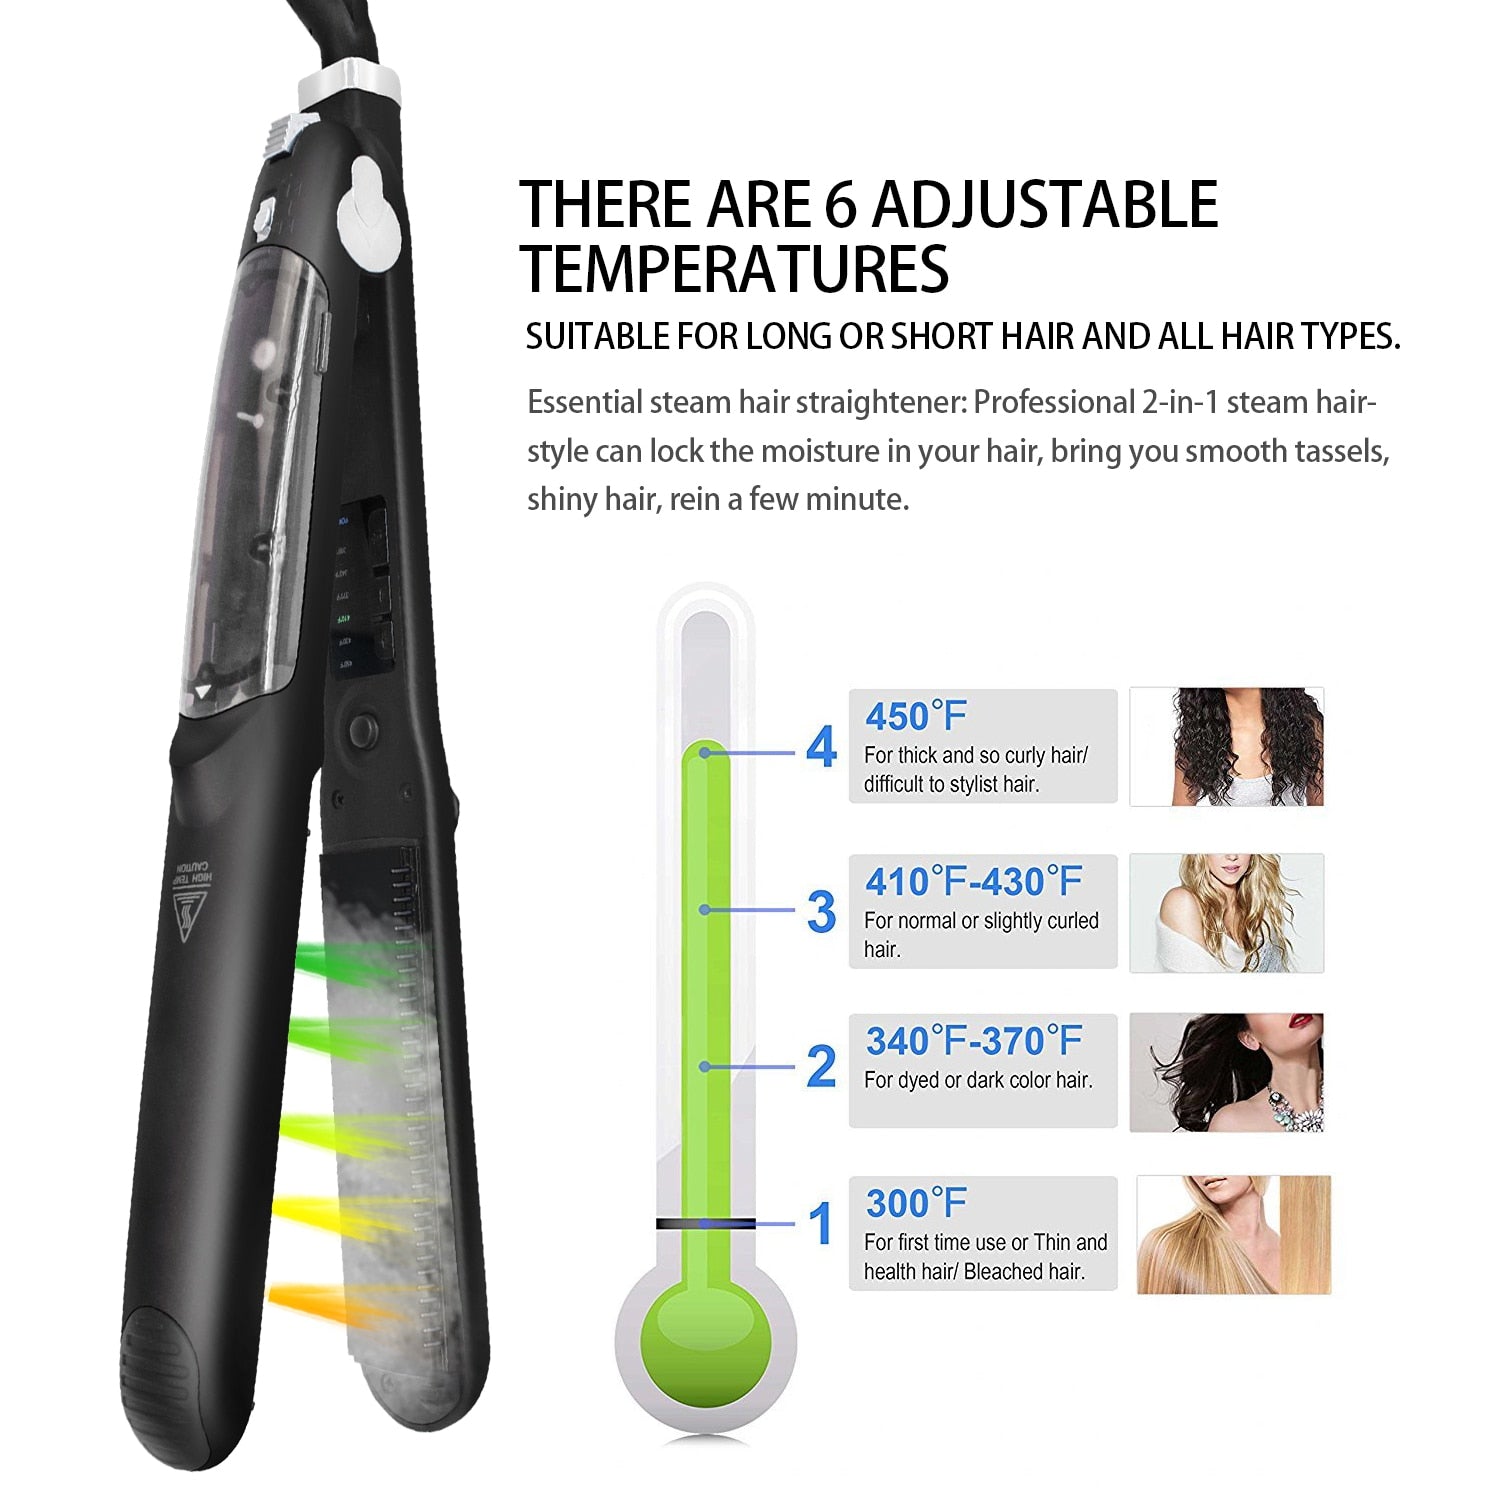 Hair Straightener Steam Flat Iron Professional Hair Care Tools Straightening Iron Brush Beauty Devices for Hairstyling Hot Comb.